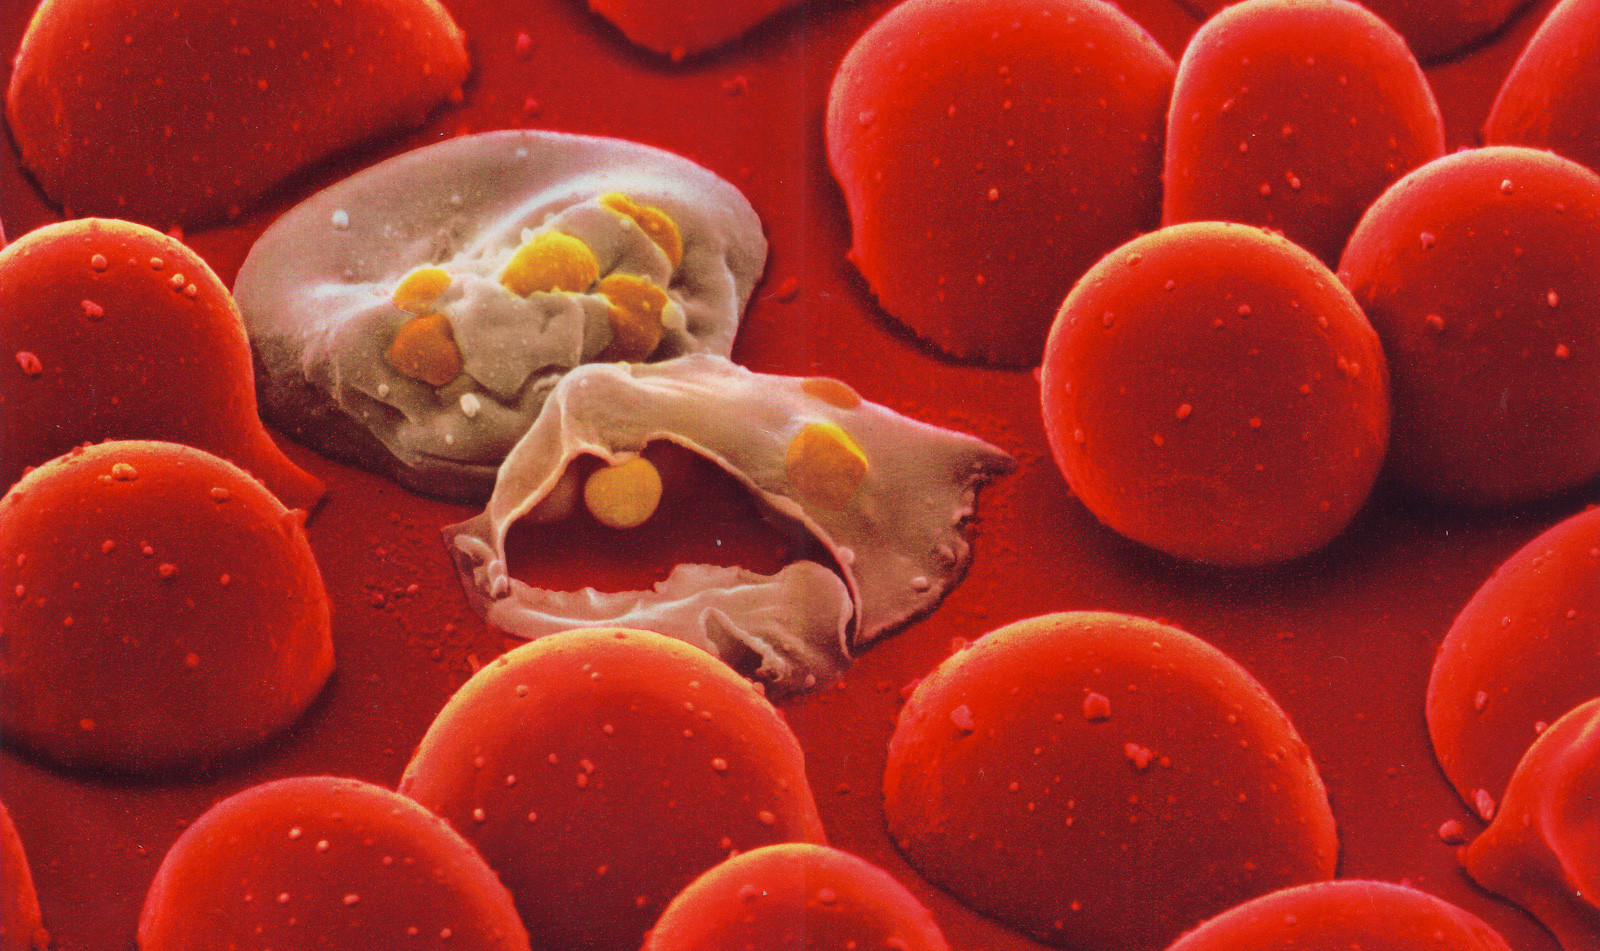 On the attack     Malaria protozoa have multiplied in two cells in a culture dish of red blood cells. One has burst open releasing the parasites to infect other cells